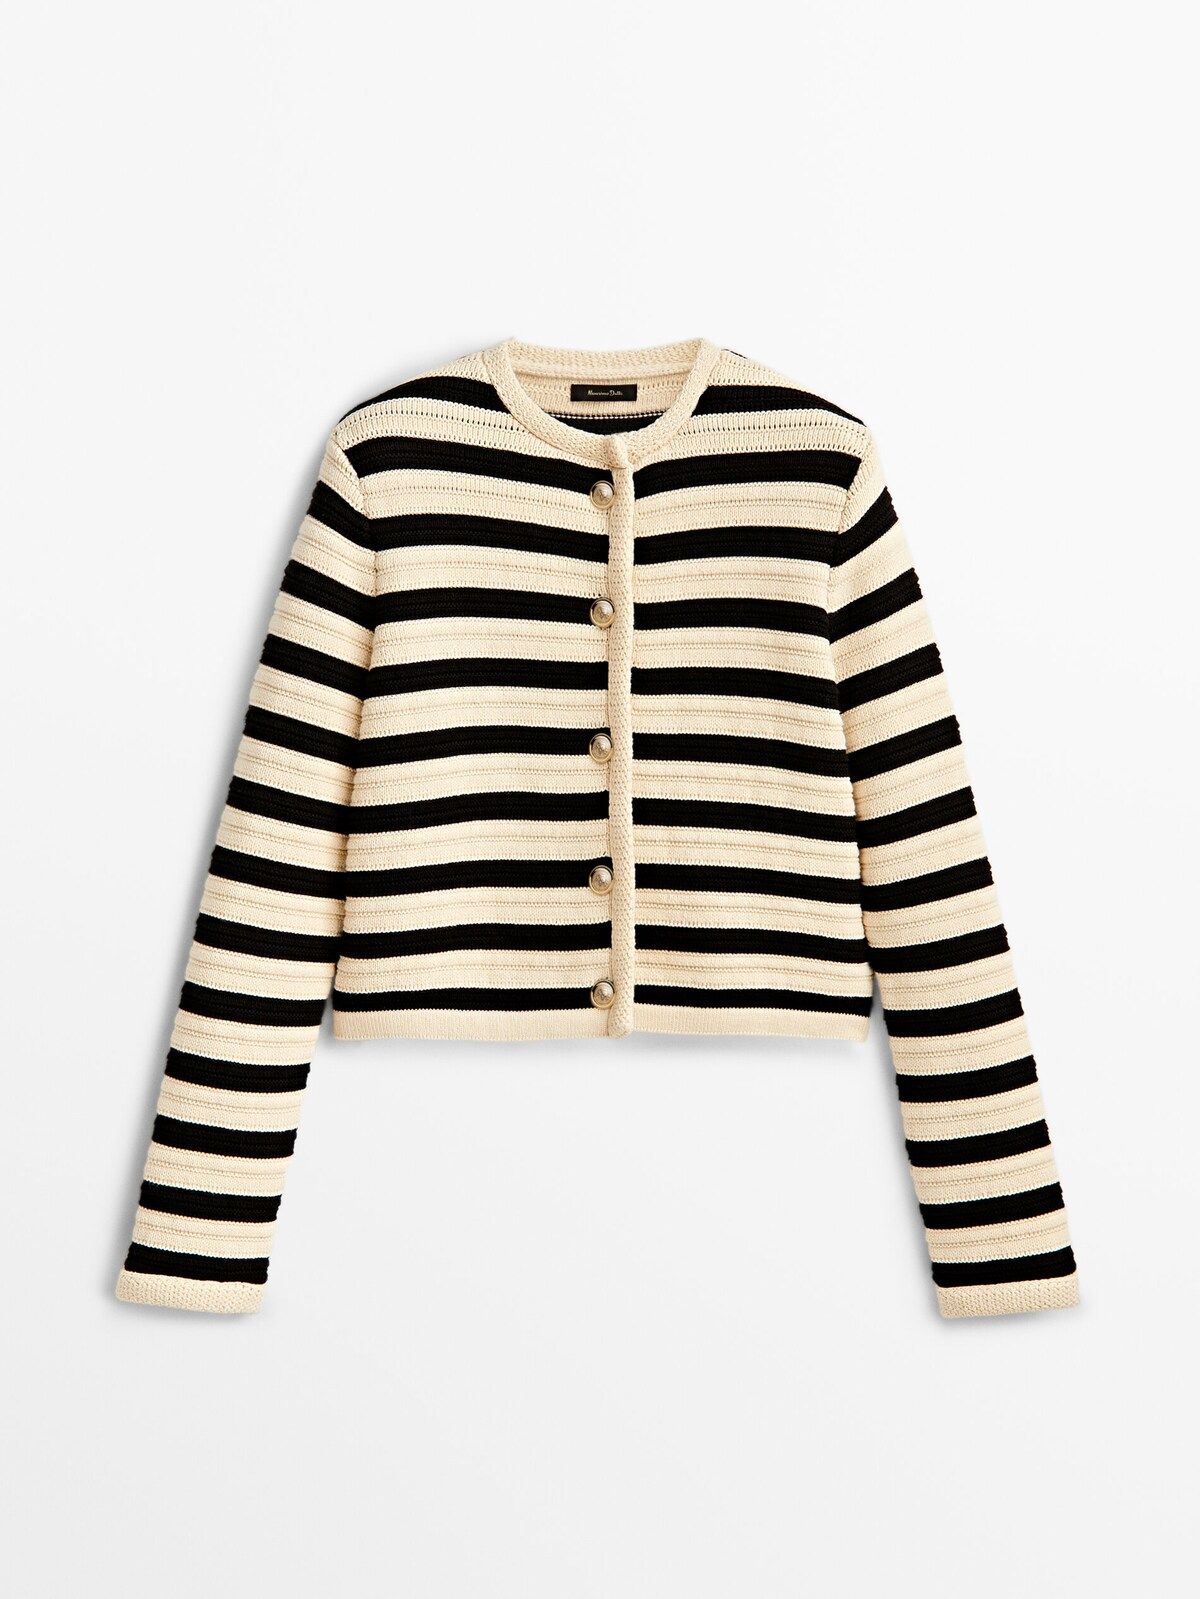 Striped knit cardigan with buttons | Massimo Dutti (US)